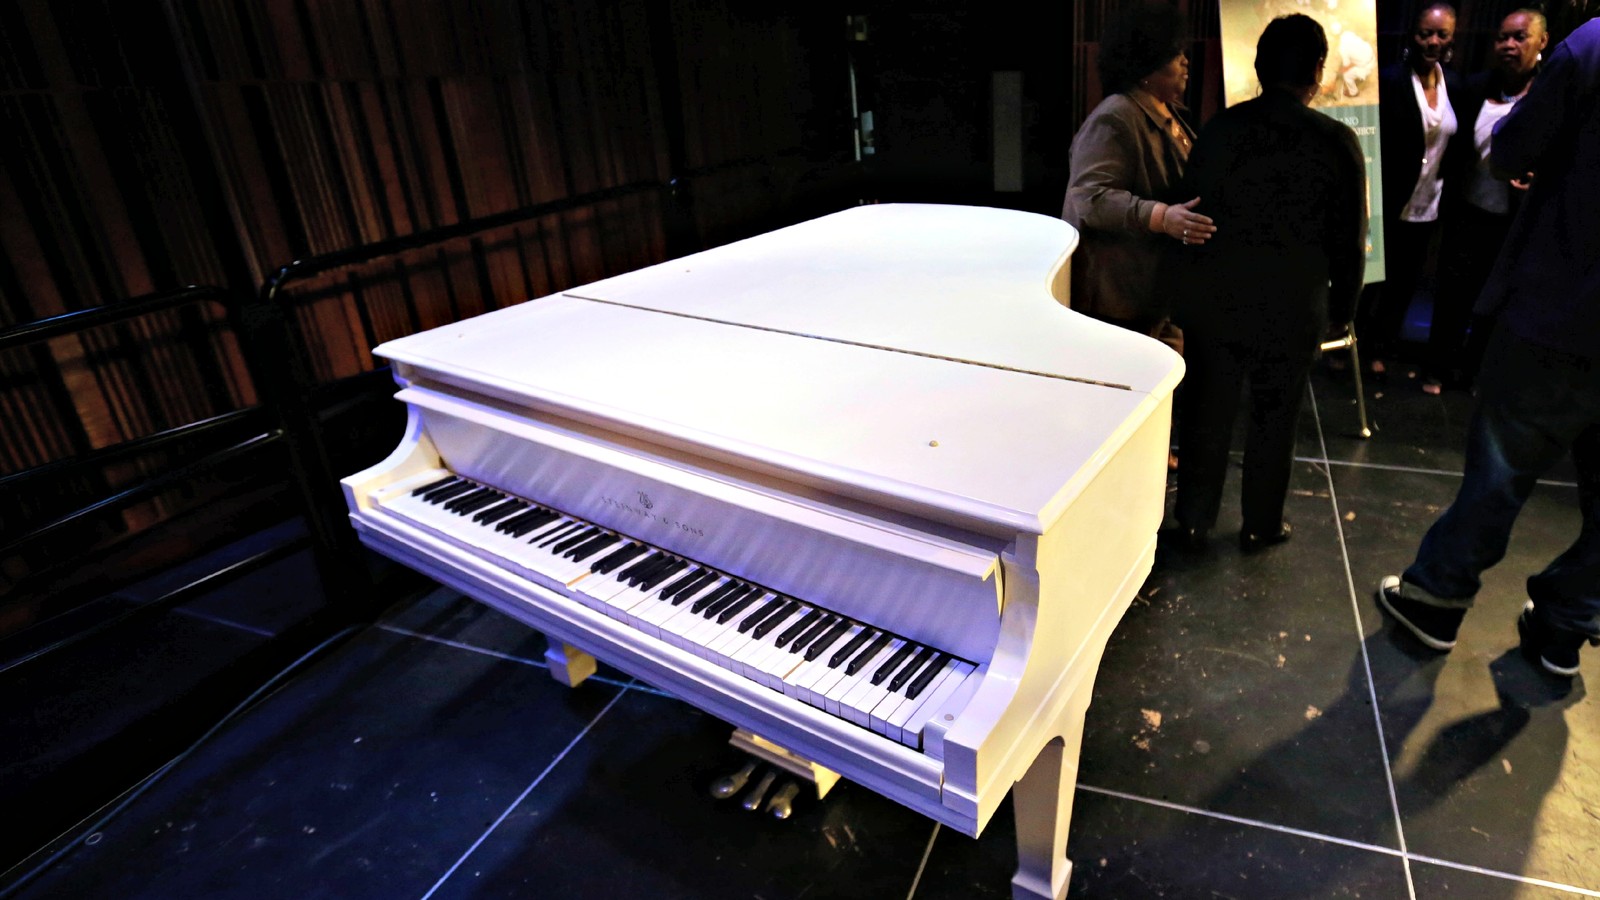 Fats Domino S White Piano As An Object Lesson For The Aftermath Of Hurricane Katrina The Atlantic